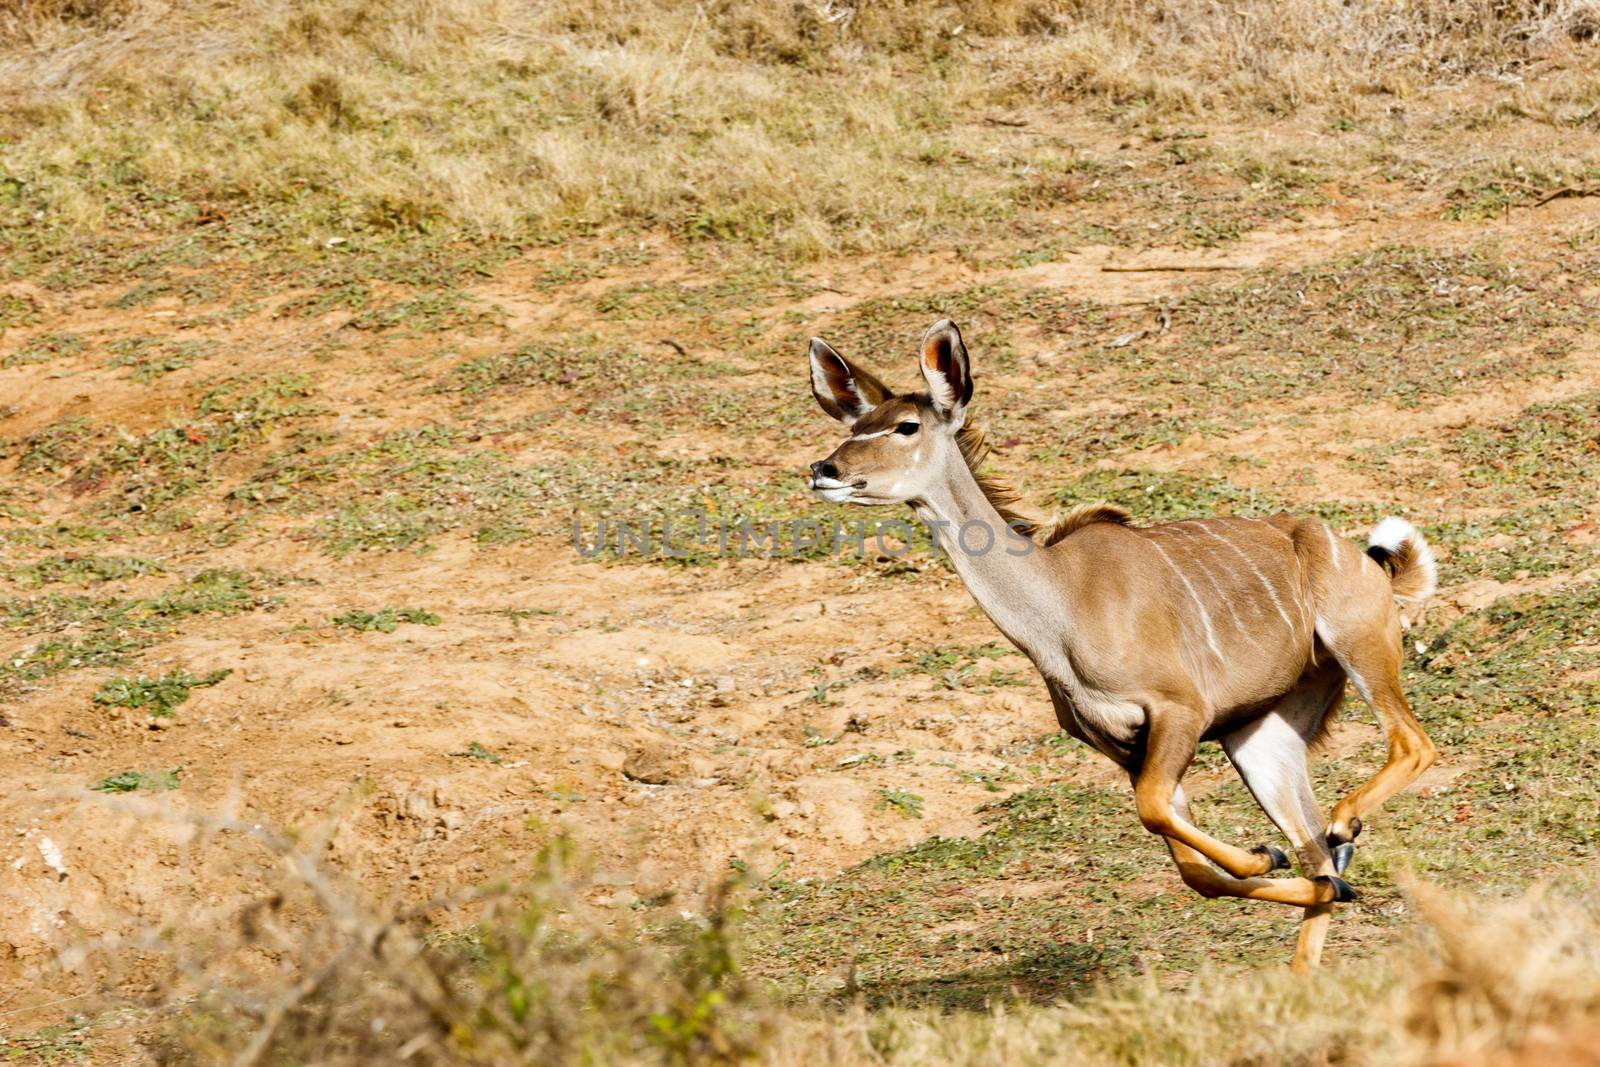 Run Kudu Run - Tragelaphus strepsiceros - The Greater Kudu is a woodland antelope found throughout eastern and southern Africa. Despite occupying such widespread territory, they are sparsely populated in most areas.